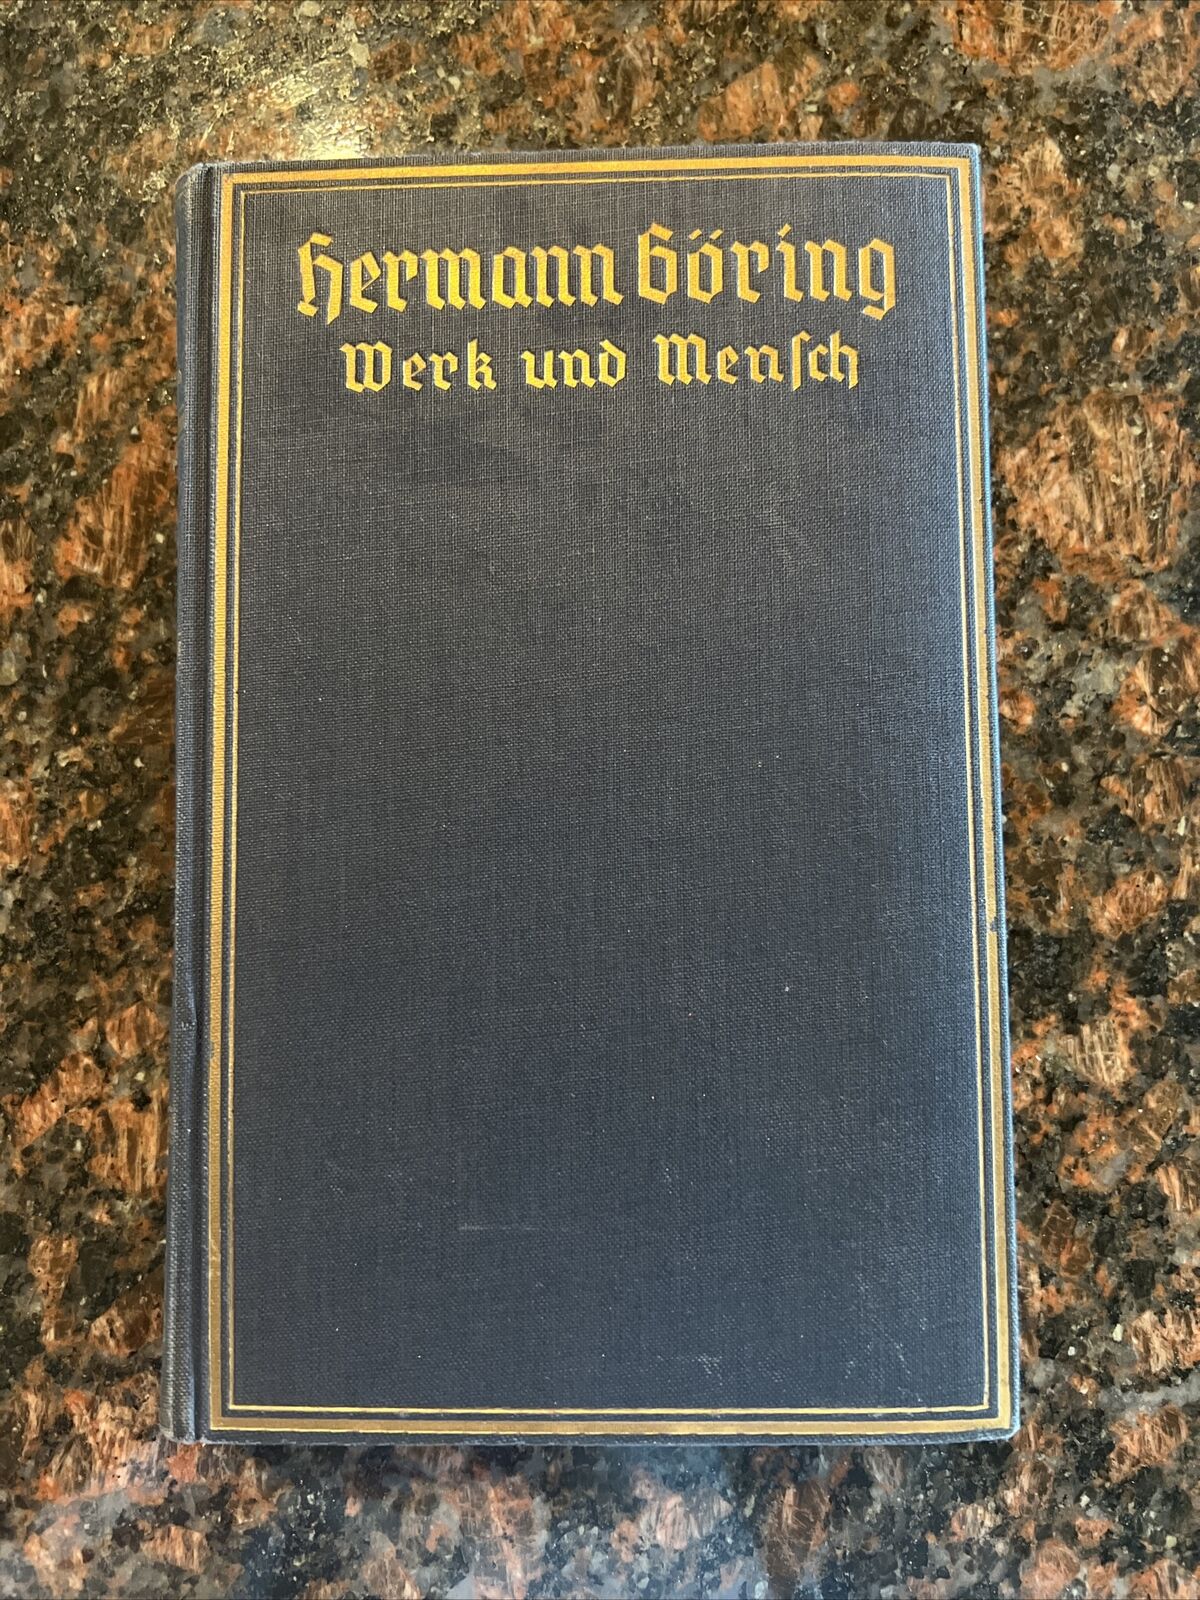 1938 Biography of Hermann Göring Published by Central Publishing House